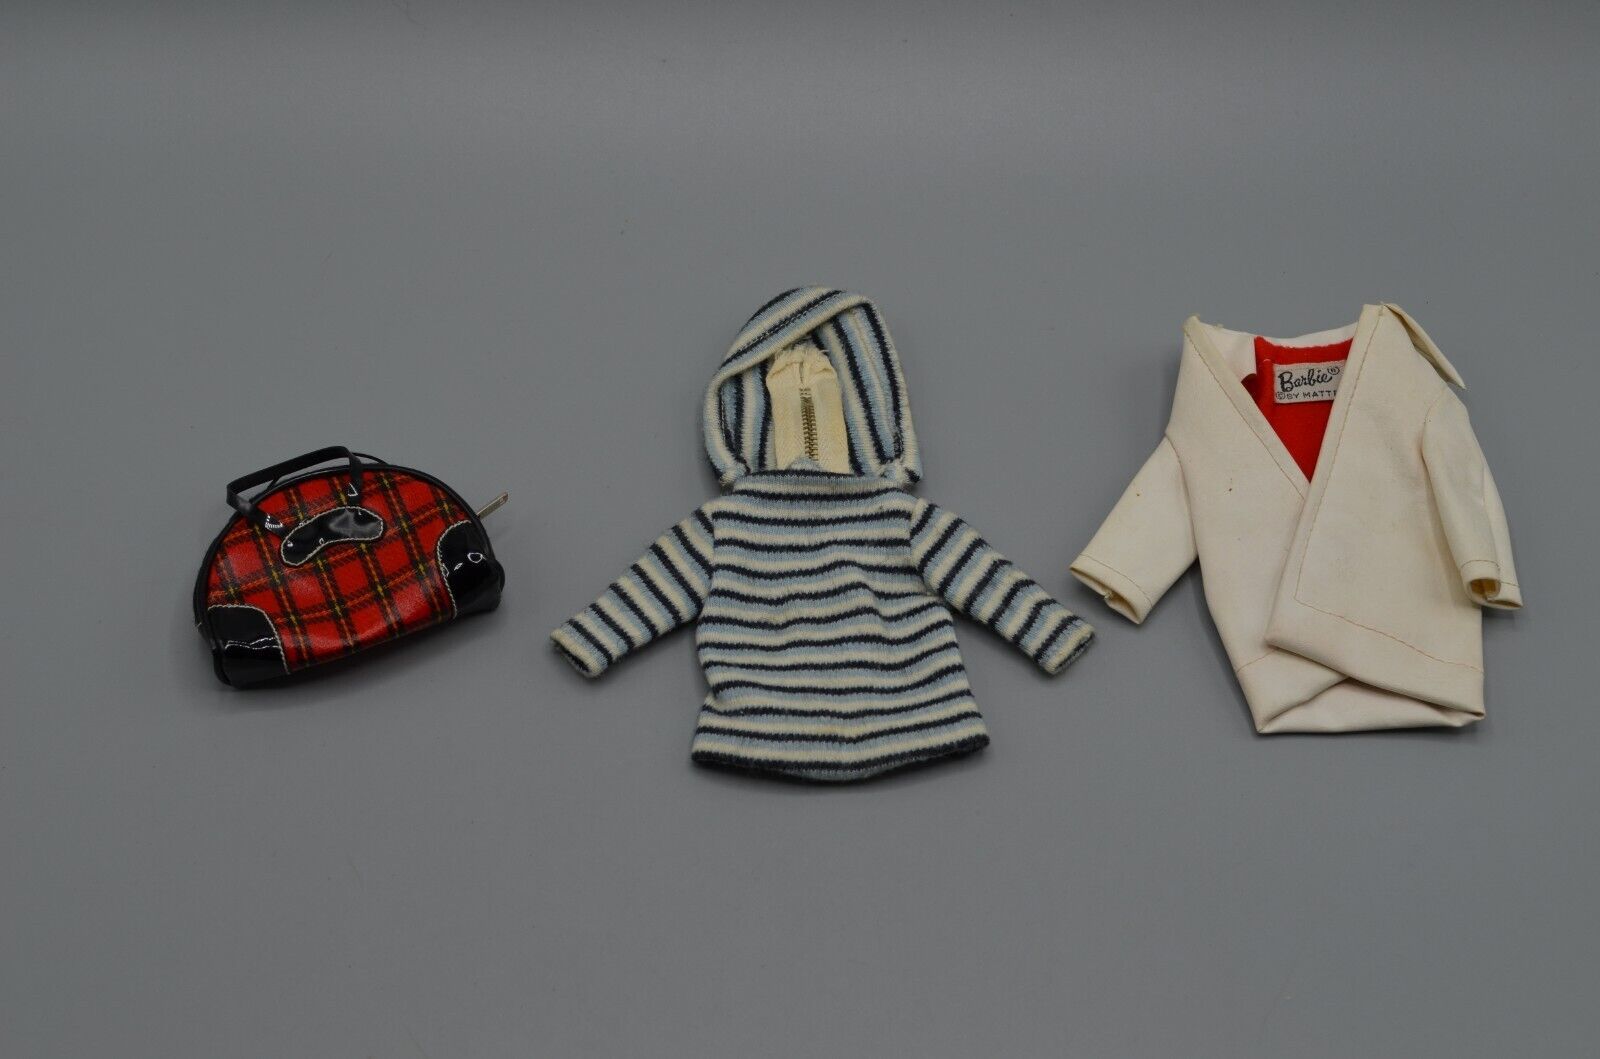 Barbie Winter Holiday #975 Fashion Doll Outfit 1959-1963 VTG Mattel Sweater Coat - $38.69